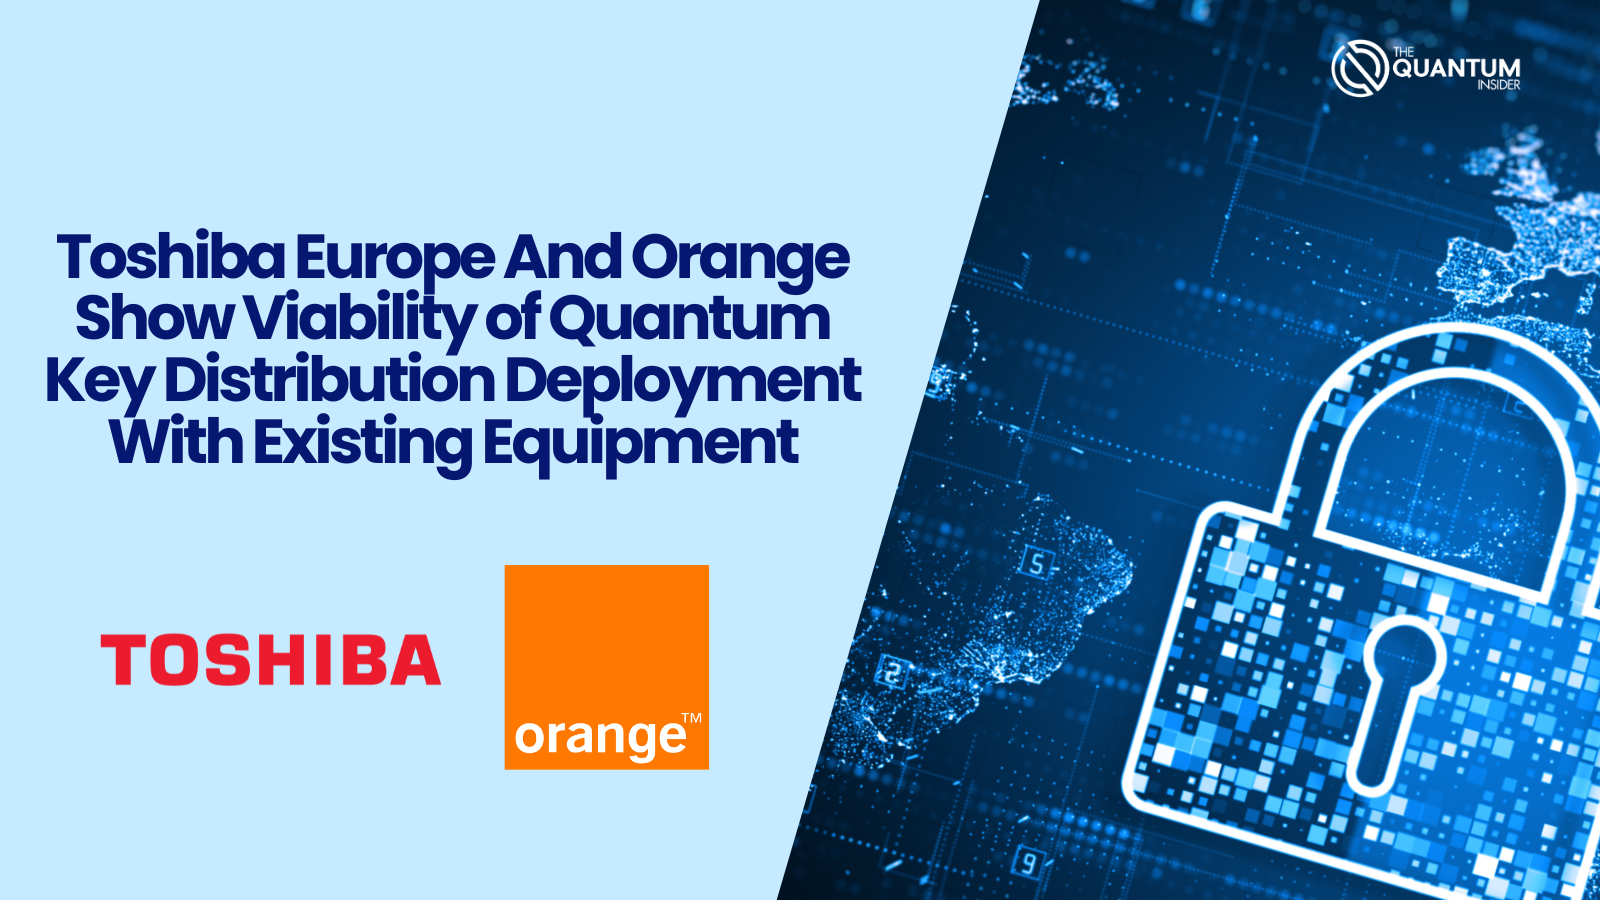 Toshiba Europe And Orange Show Viability of Quantum Key Distribution Deployment With Existing Equipment